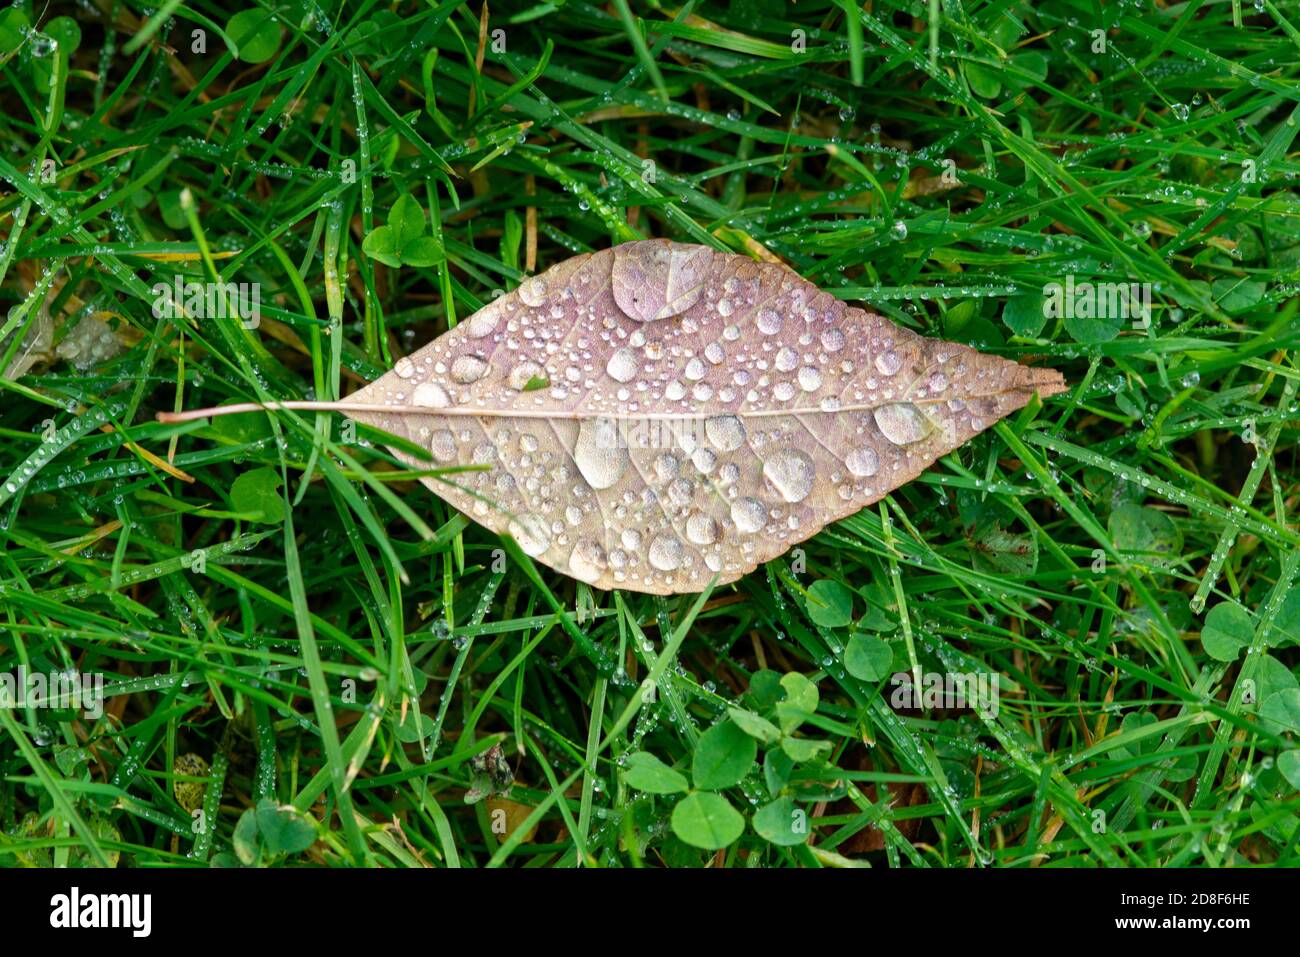 A close up of a small brown dead elm leaf laying on grass and clover with raindrops on the leaf. The grass is a vibrant green color. Stock Photo